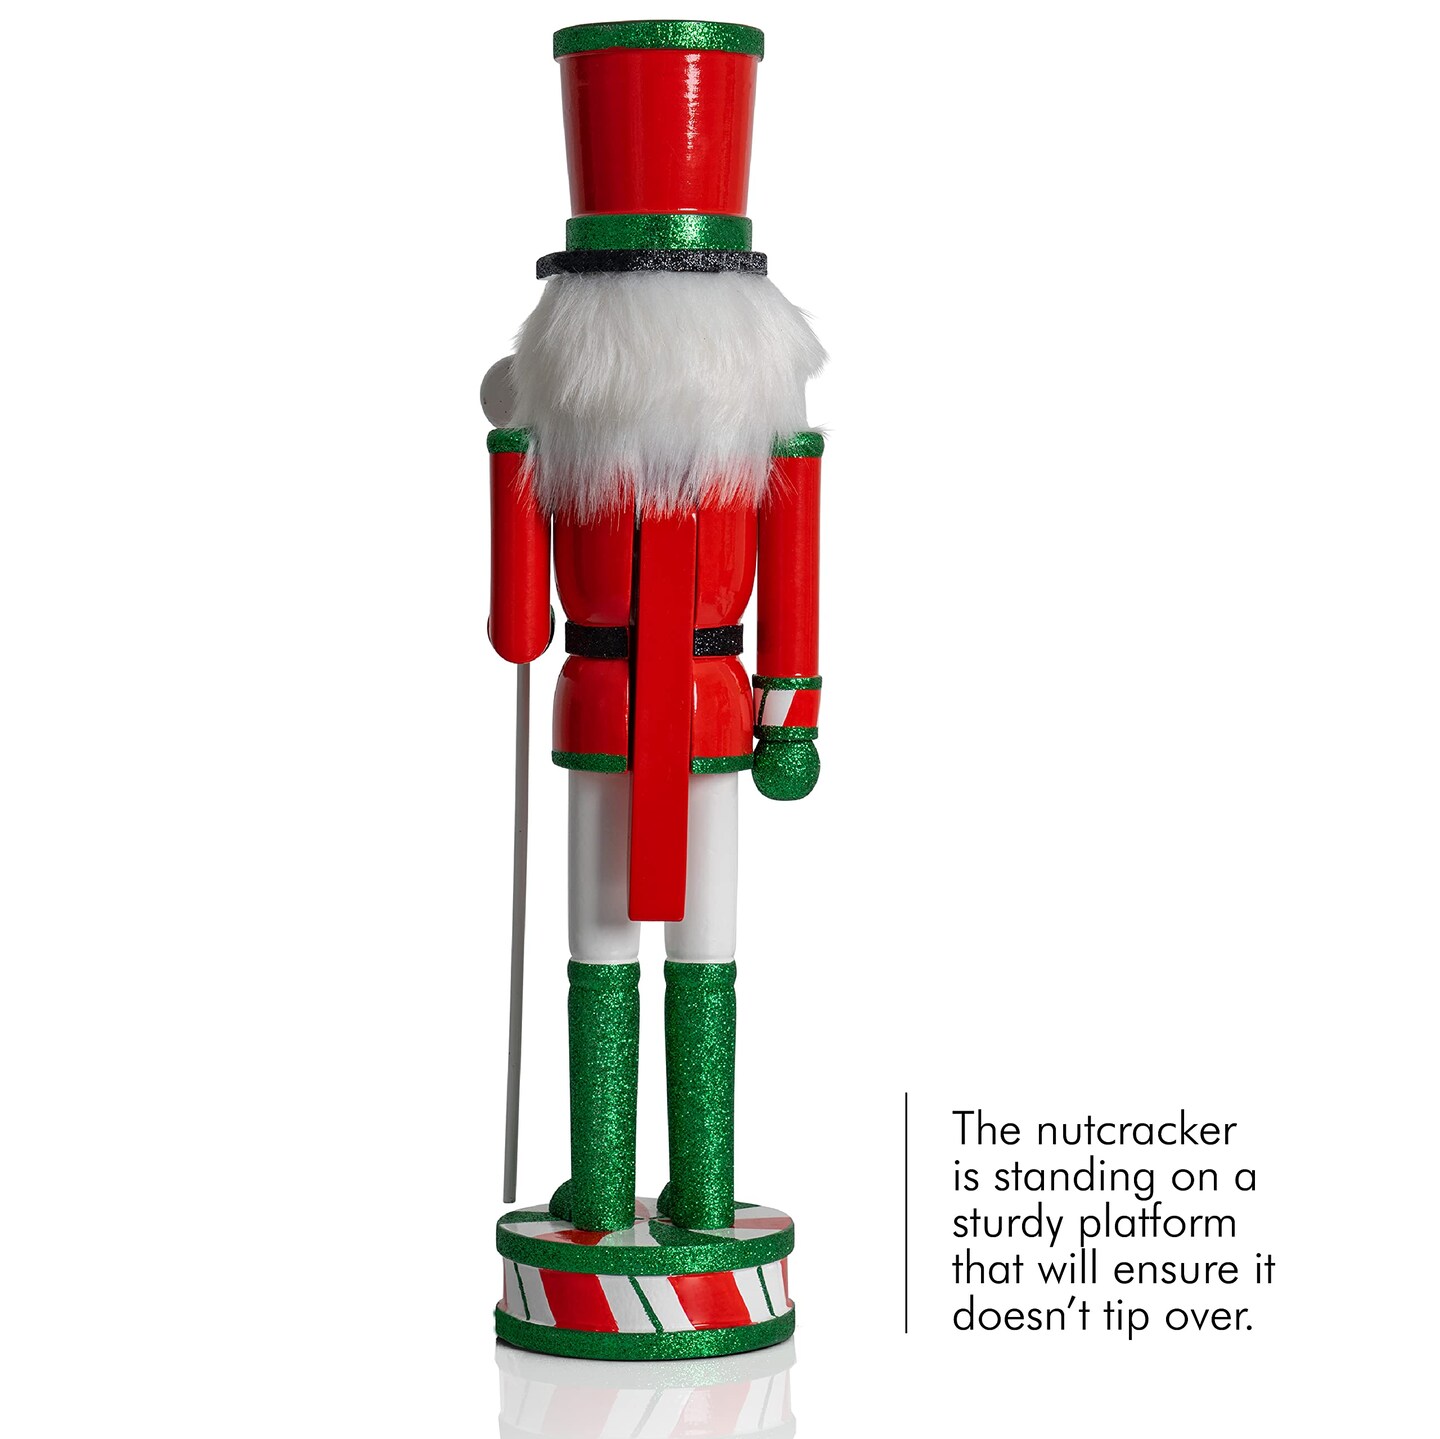 Ornativity Wooden Peppermint Christmas Nutcracker - Red, White and Green Glitter Candy Themed Holiday Nut Cracker Doll Figure Toy Soldier Decorations